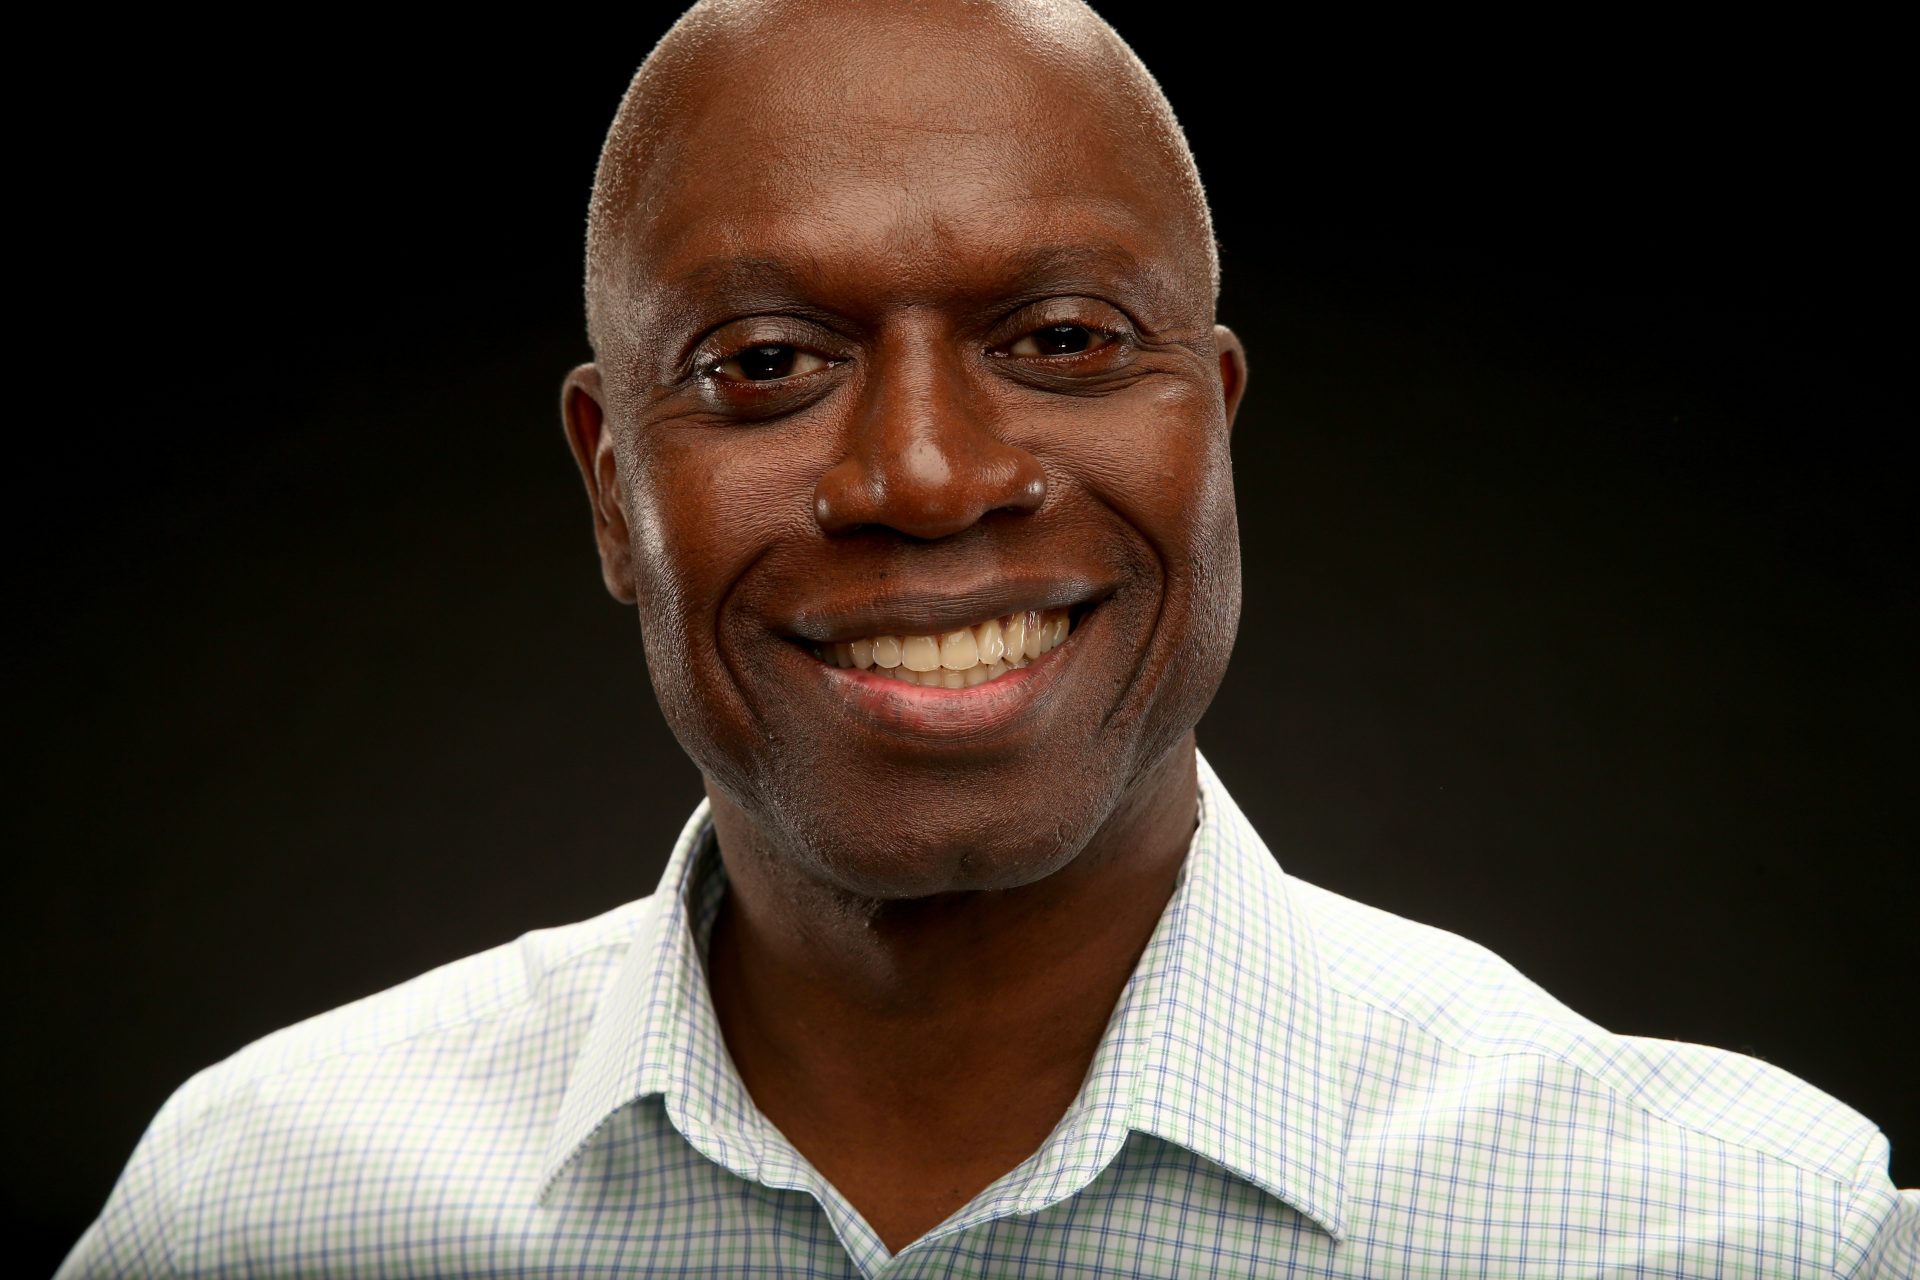 The unexpected death of Andre Braugher